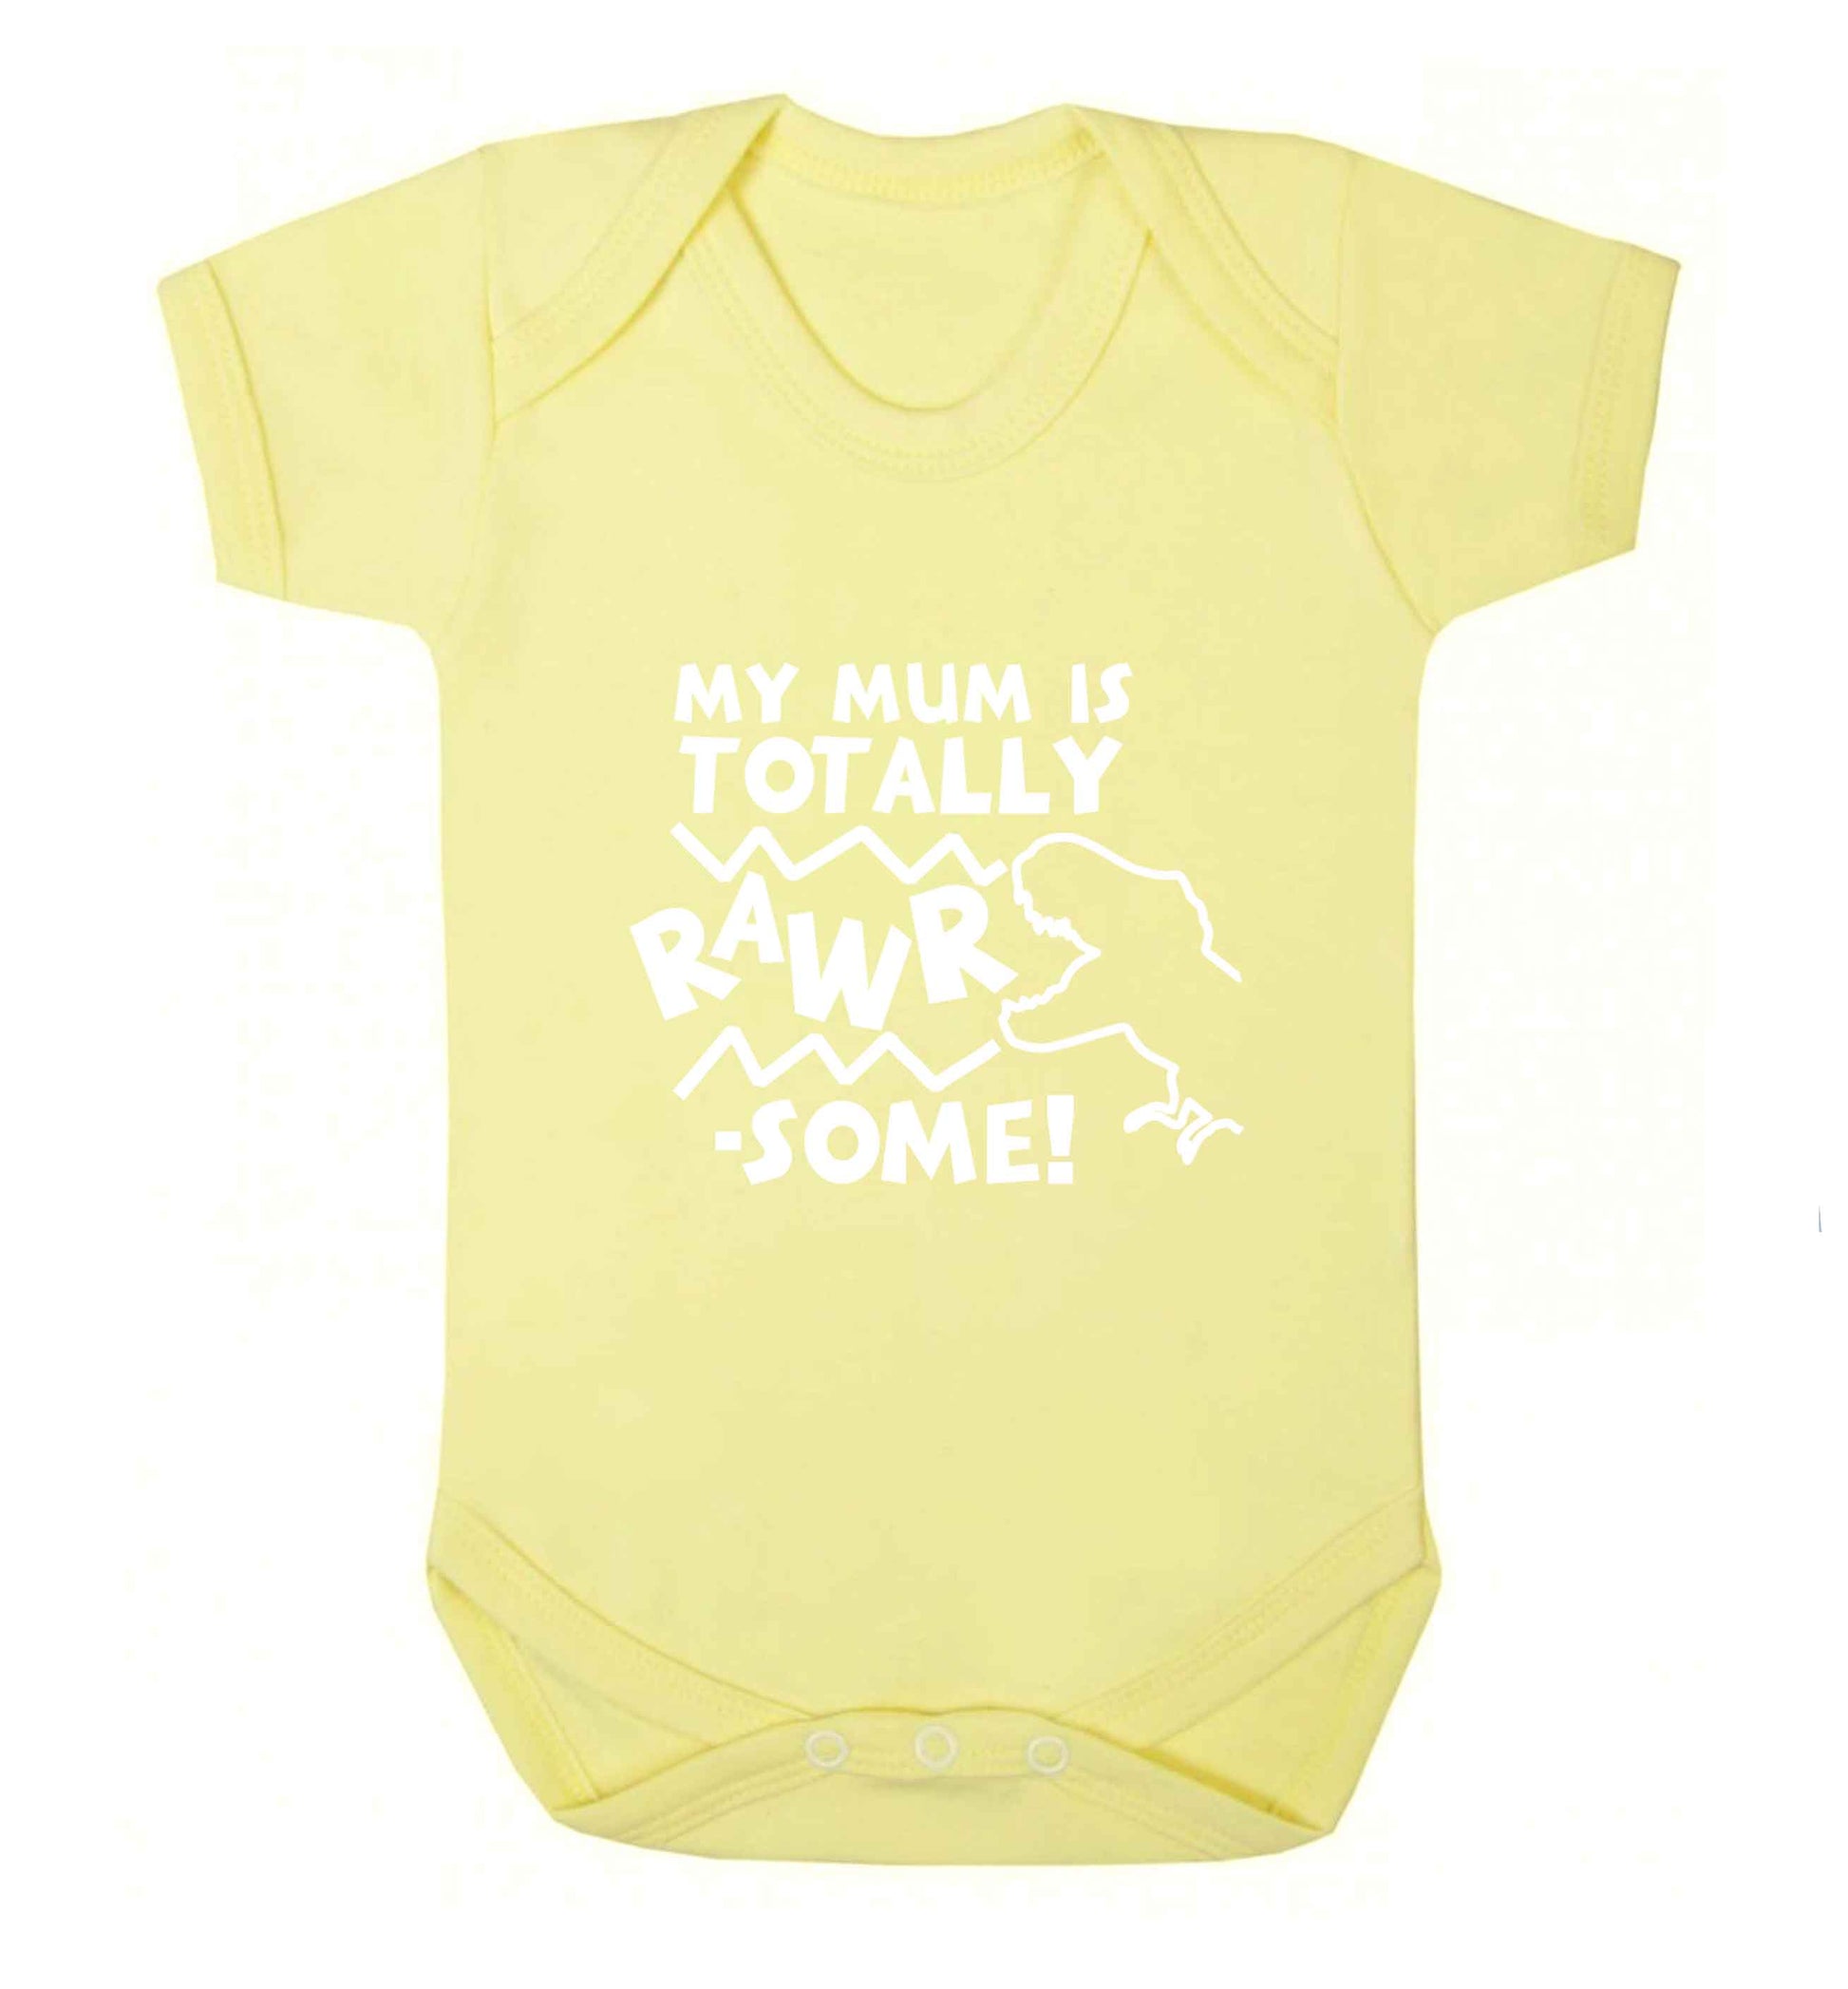 My mum is totally rawrsome baby vest pale yellow 18-24 months